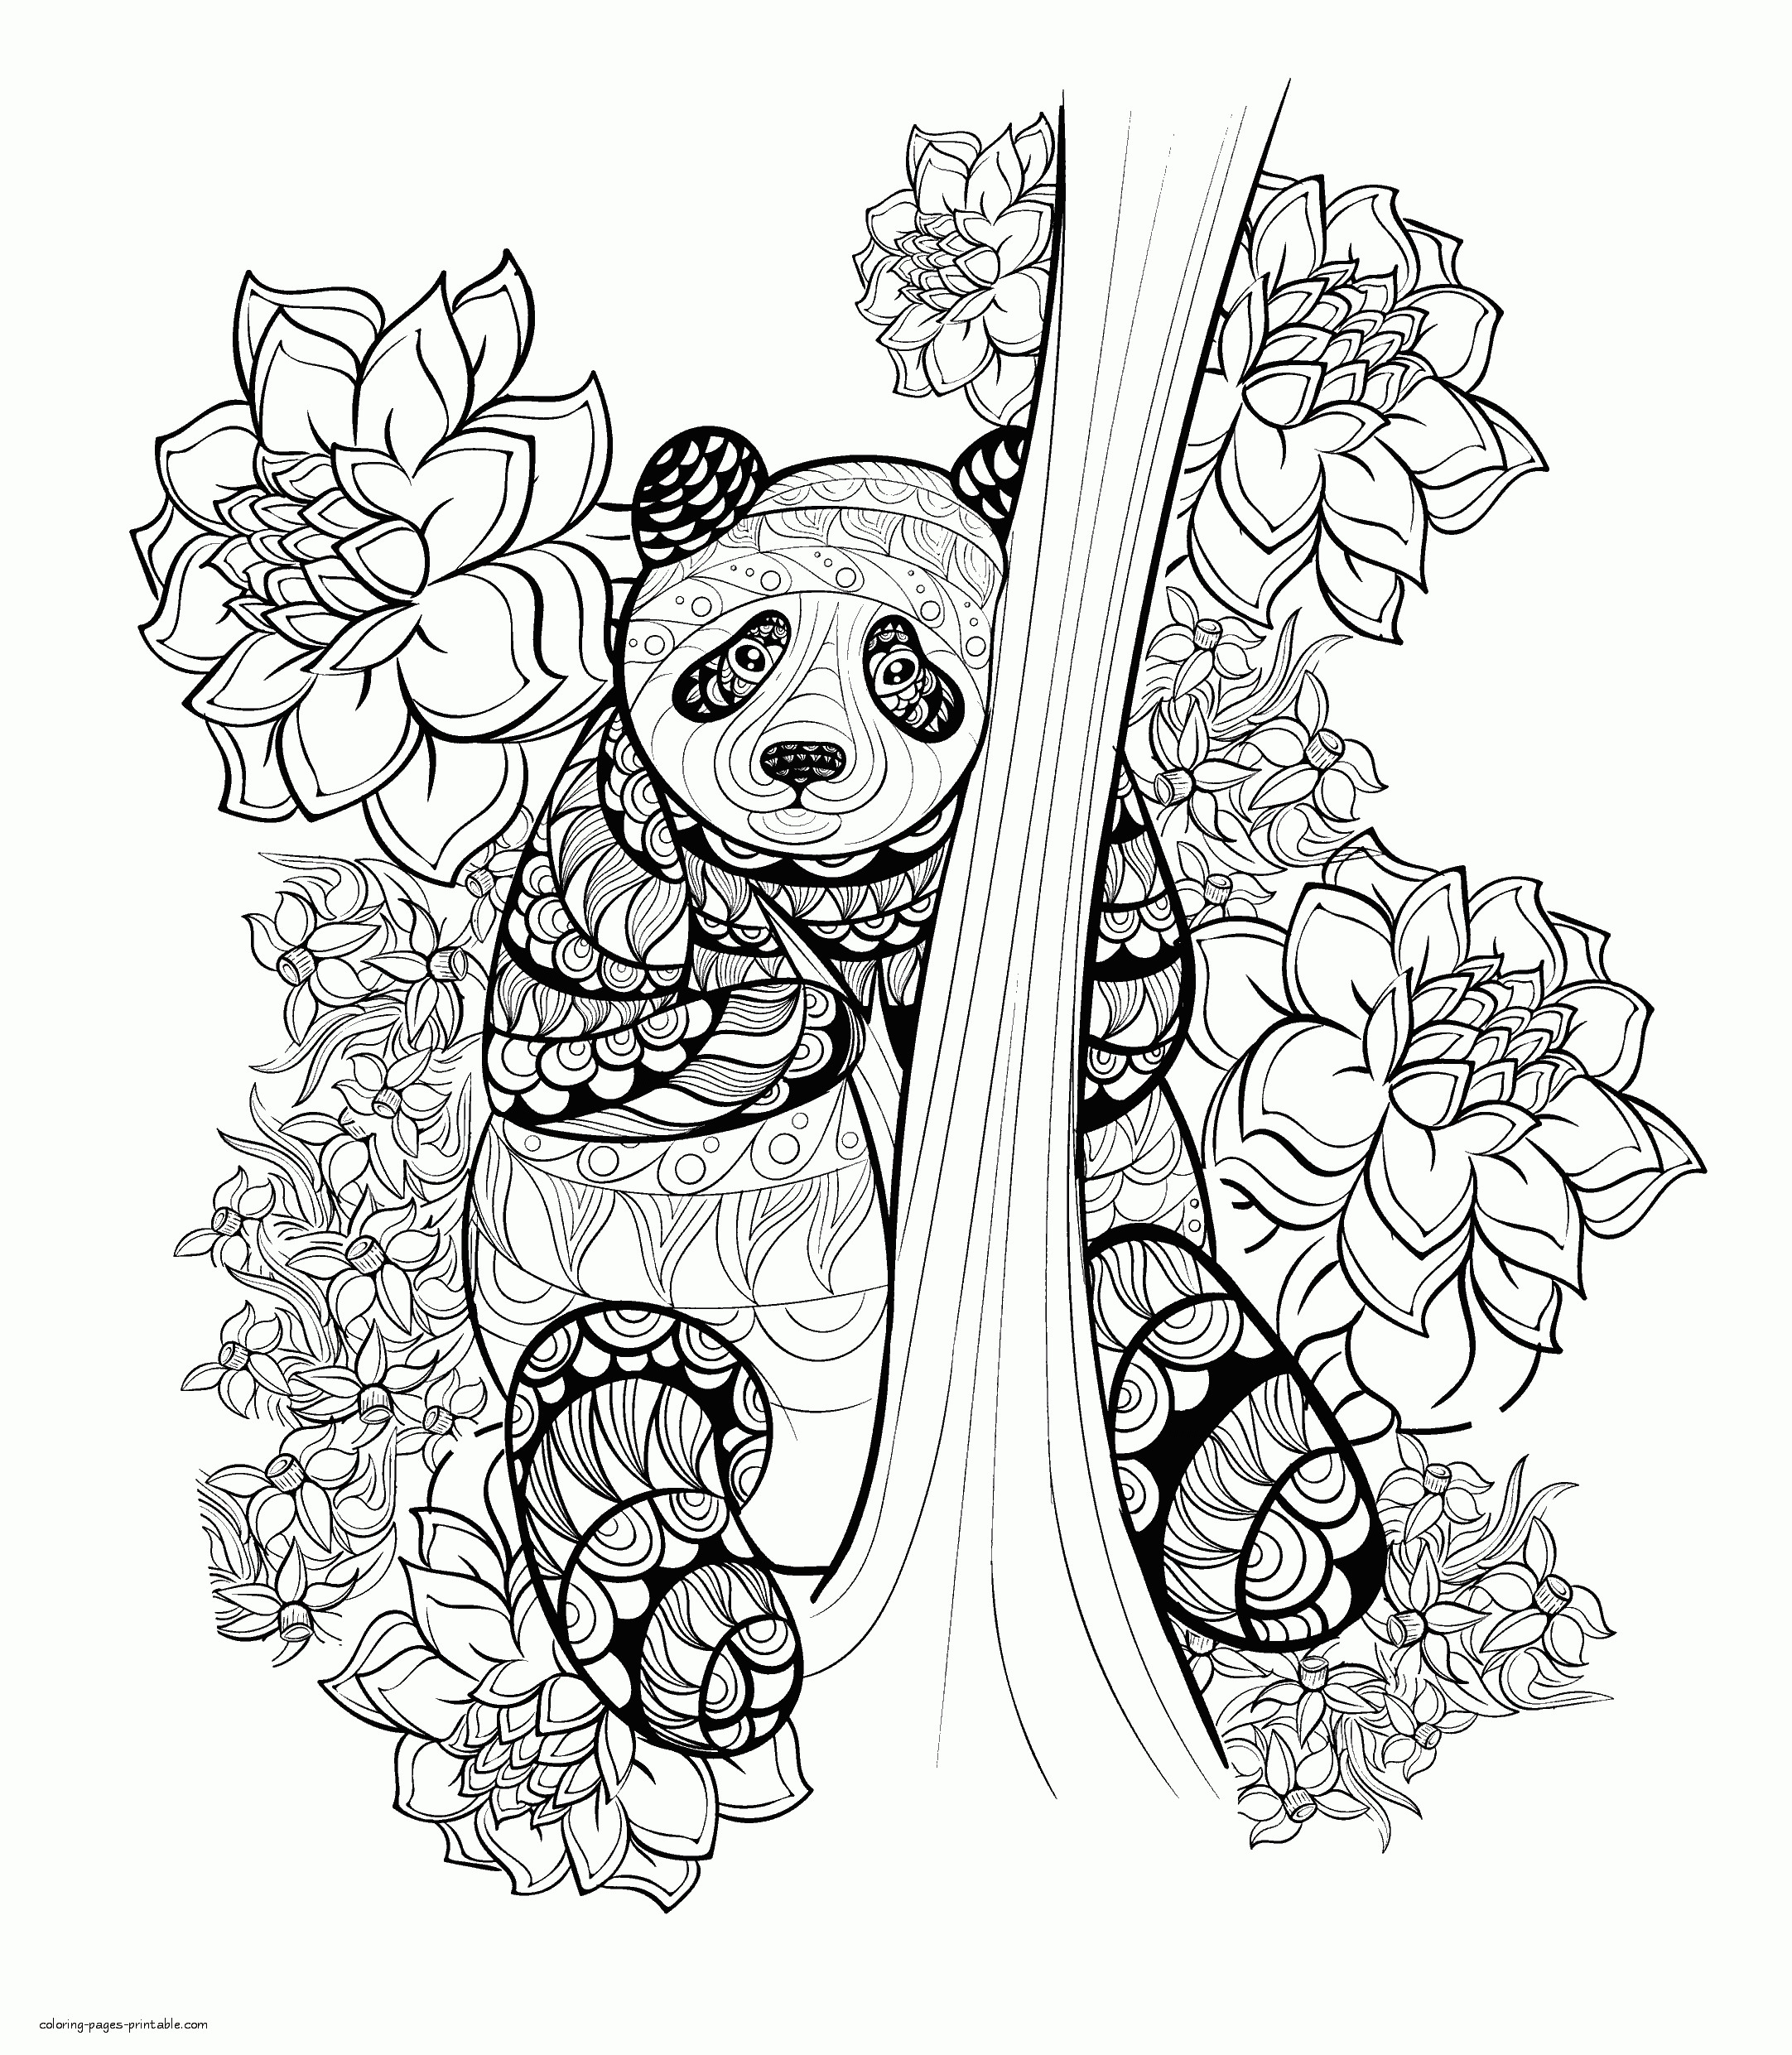 Panda Coloring Pages For Adults
 Panda Coloring Page For Adults COLORING PAGES PRINTABLE